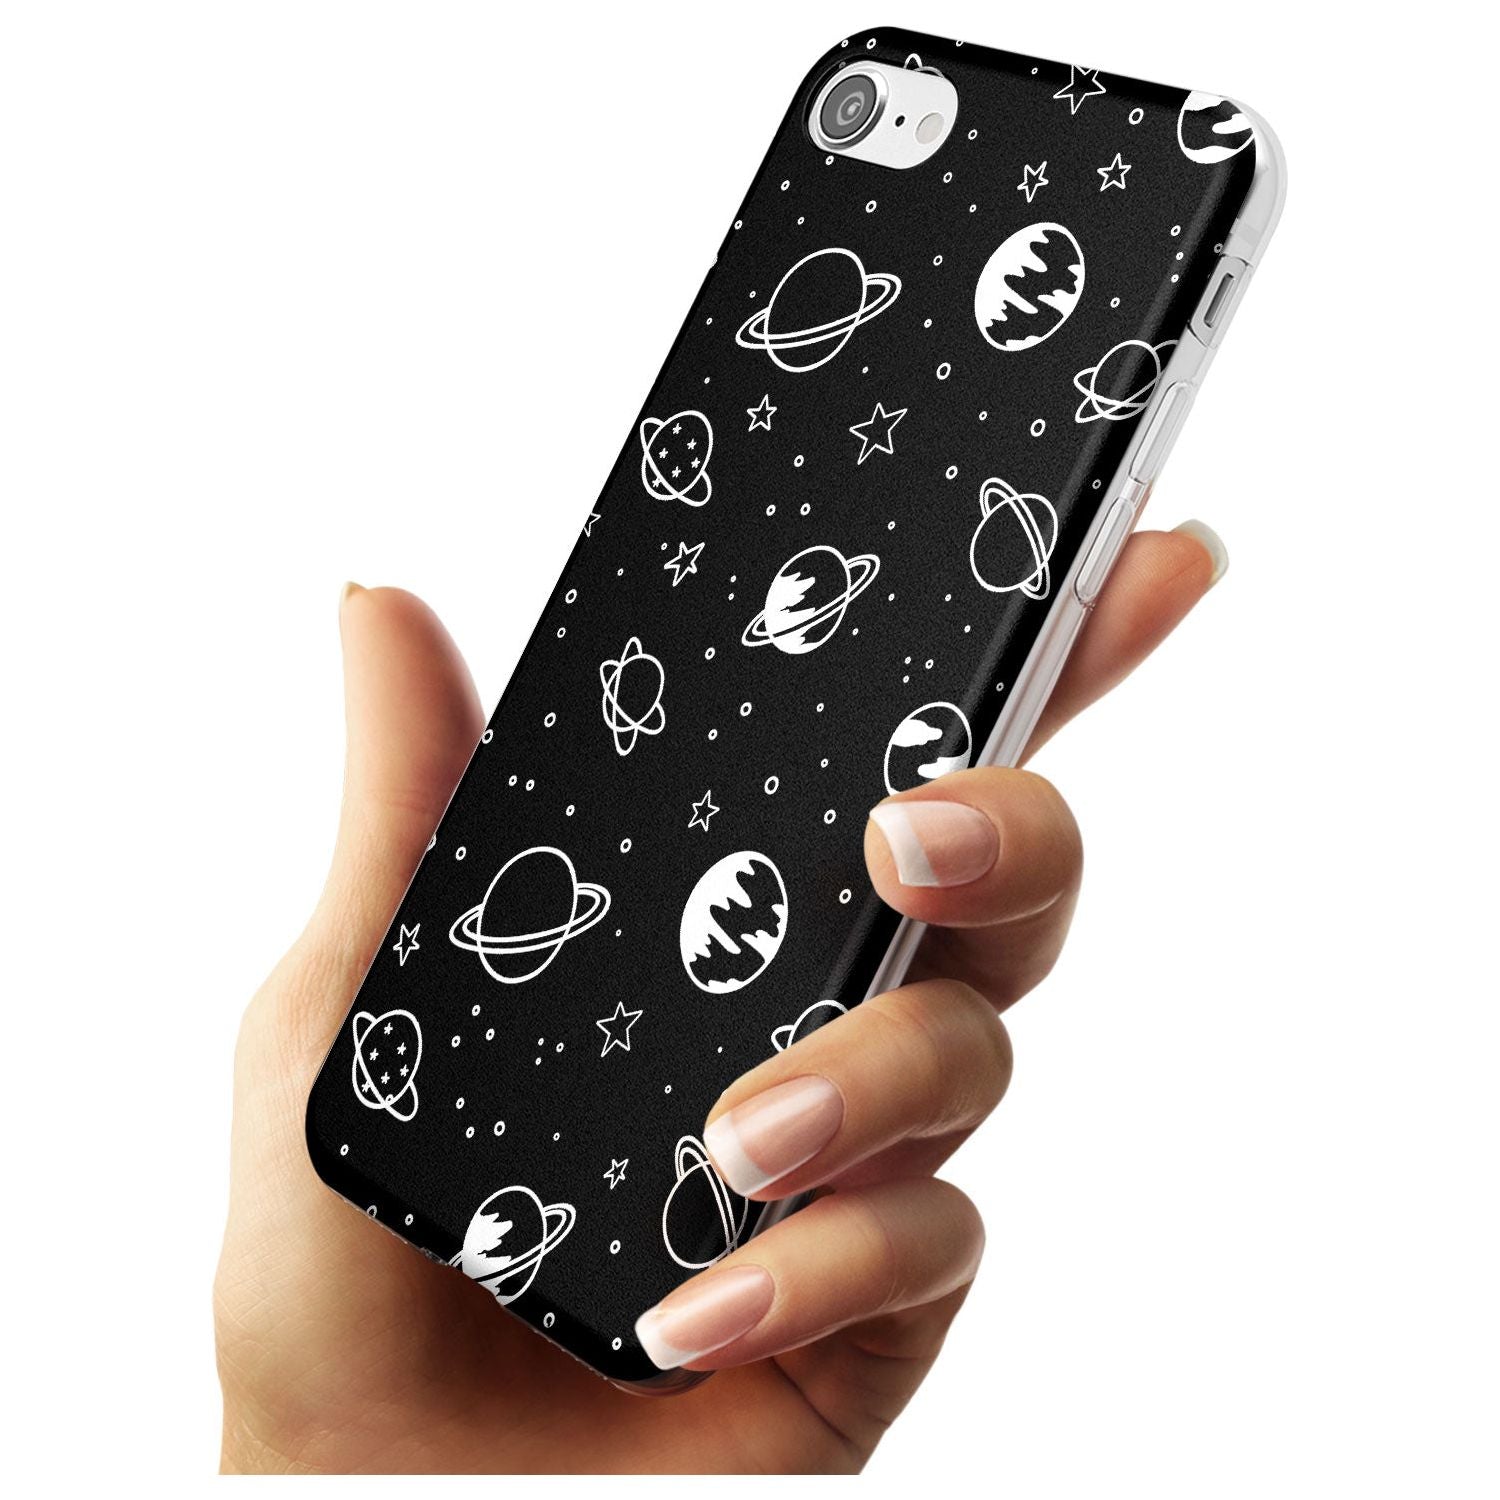 Outer Space Outlines: White on Black Black Impact Phone Case for iPhone SE 8 7 Plus